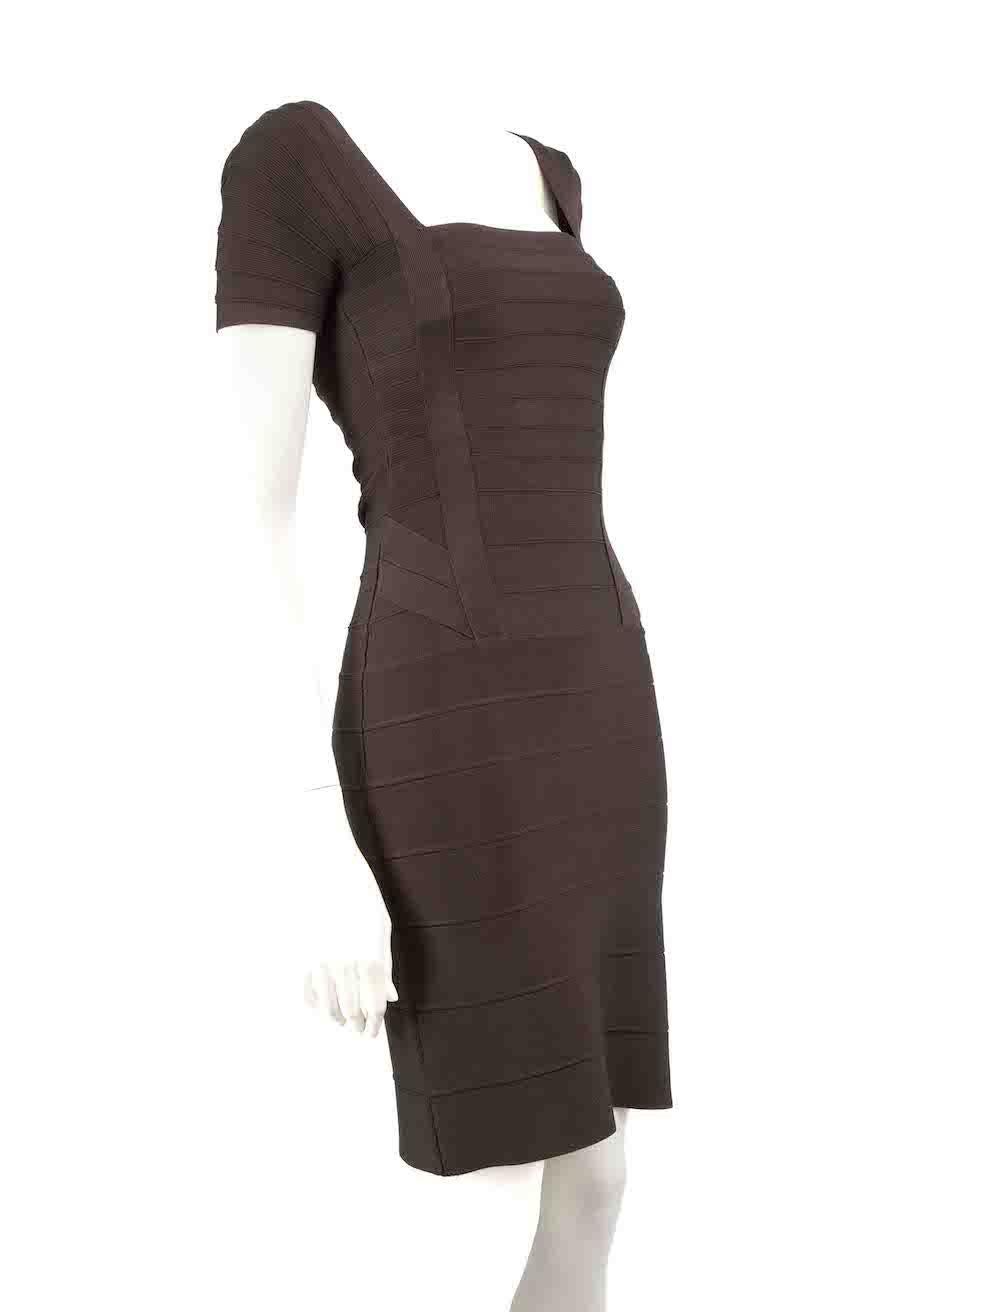 CONDITION is Good. General wear to dress is evident. Moderate signs of wear to the front, back and sides with pilling and plucks to the weave on this used Herve Leger designer resale item.
 
 
 
 Details
 
 
 Brown
 
 Viscose
 
 Bodycon bandage